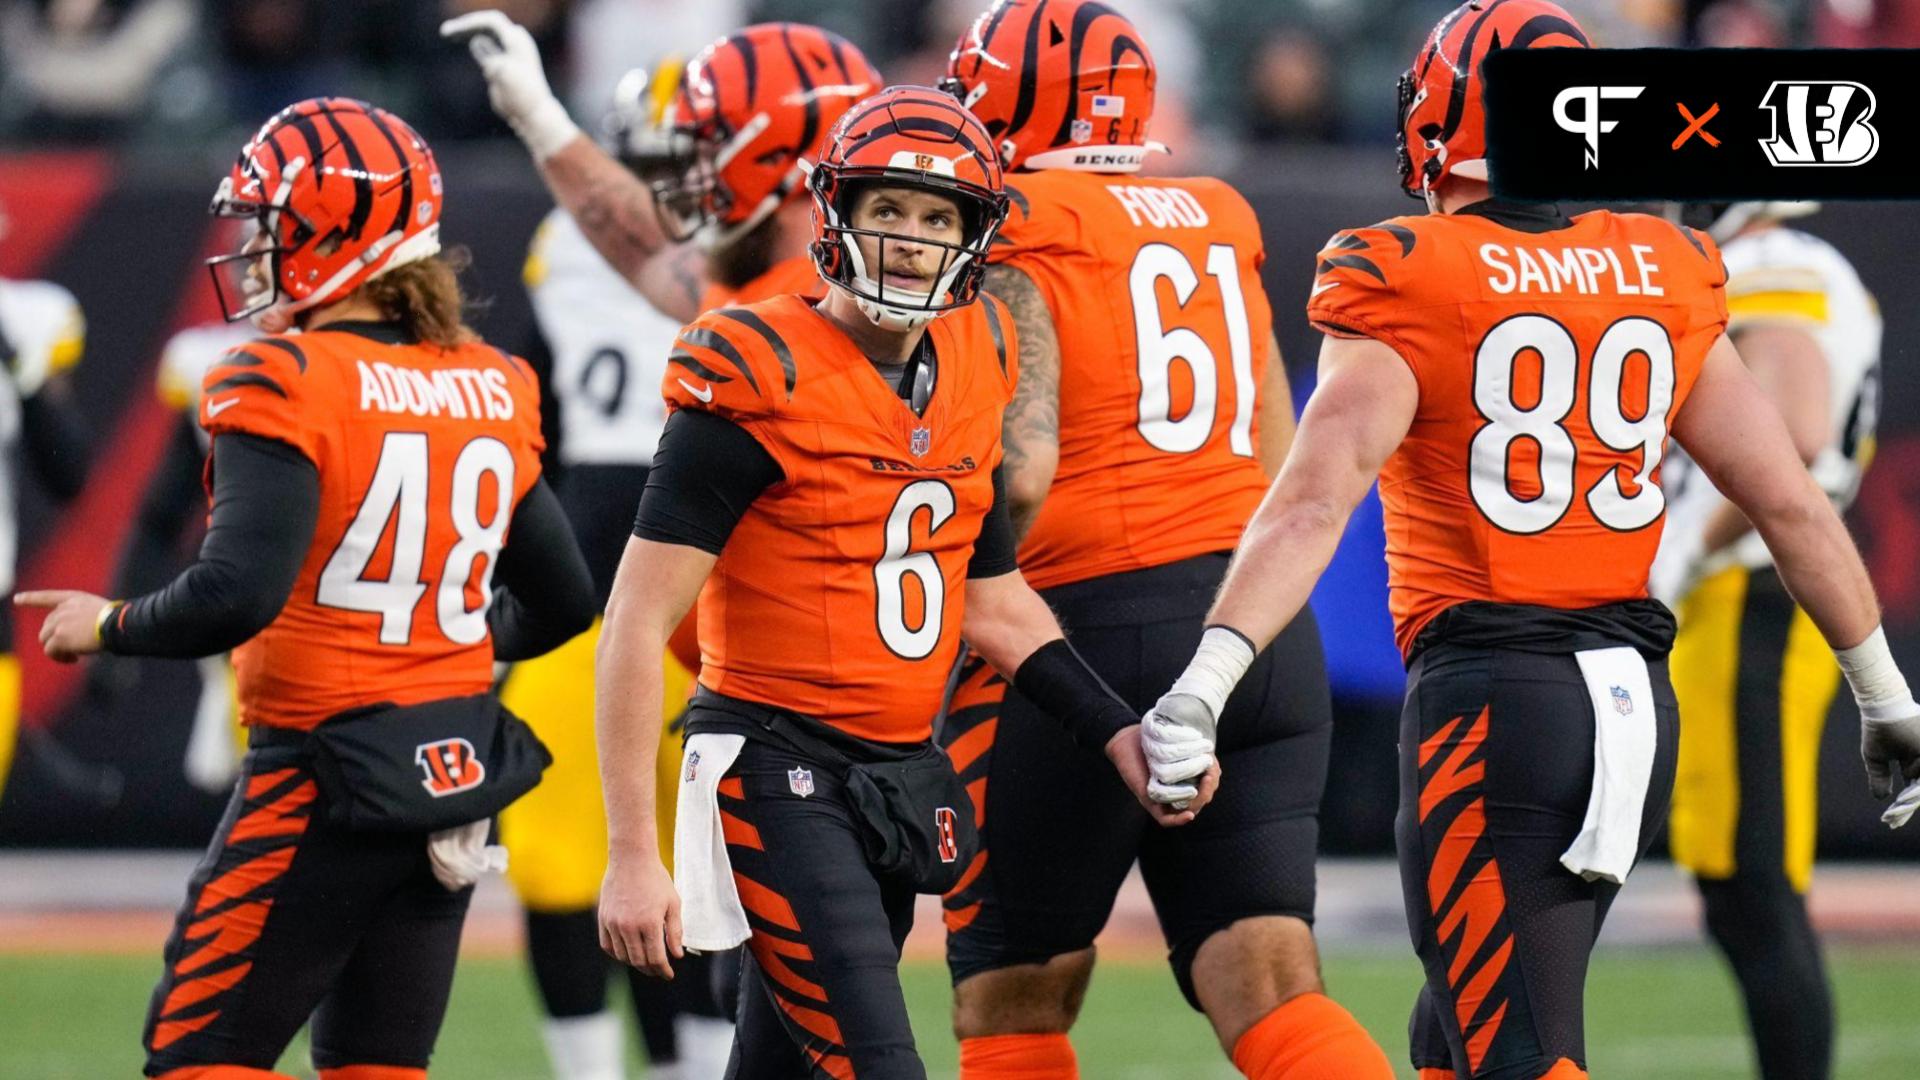 Cincinnati Bengals players come off the field against the Pittsburgh Steelers.